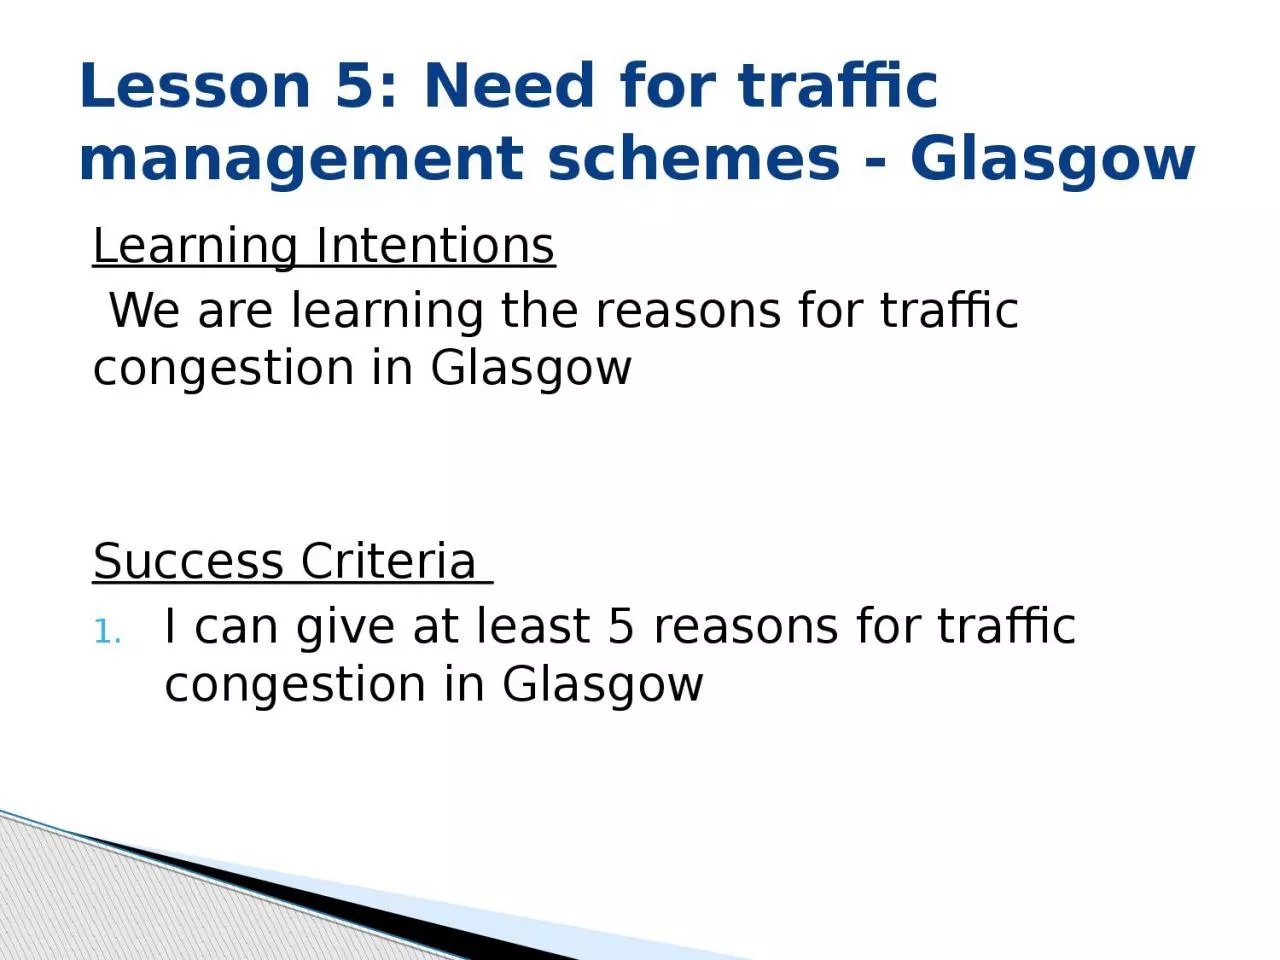 Learning Intentions  We are learning the reasons for traffic congestion in Glasgow